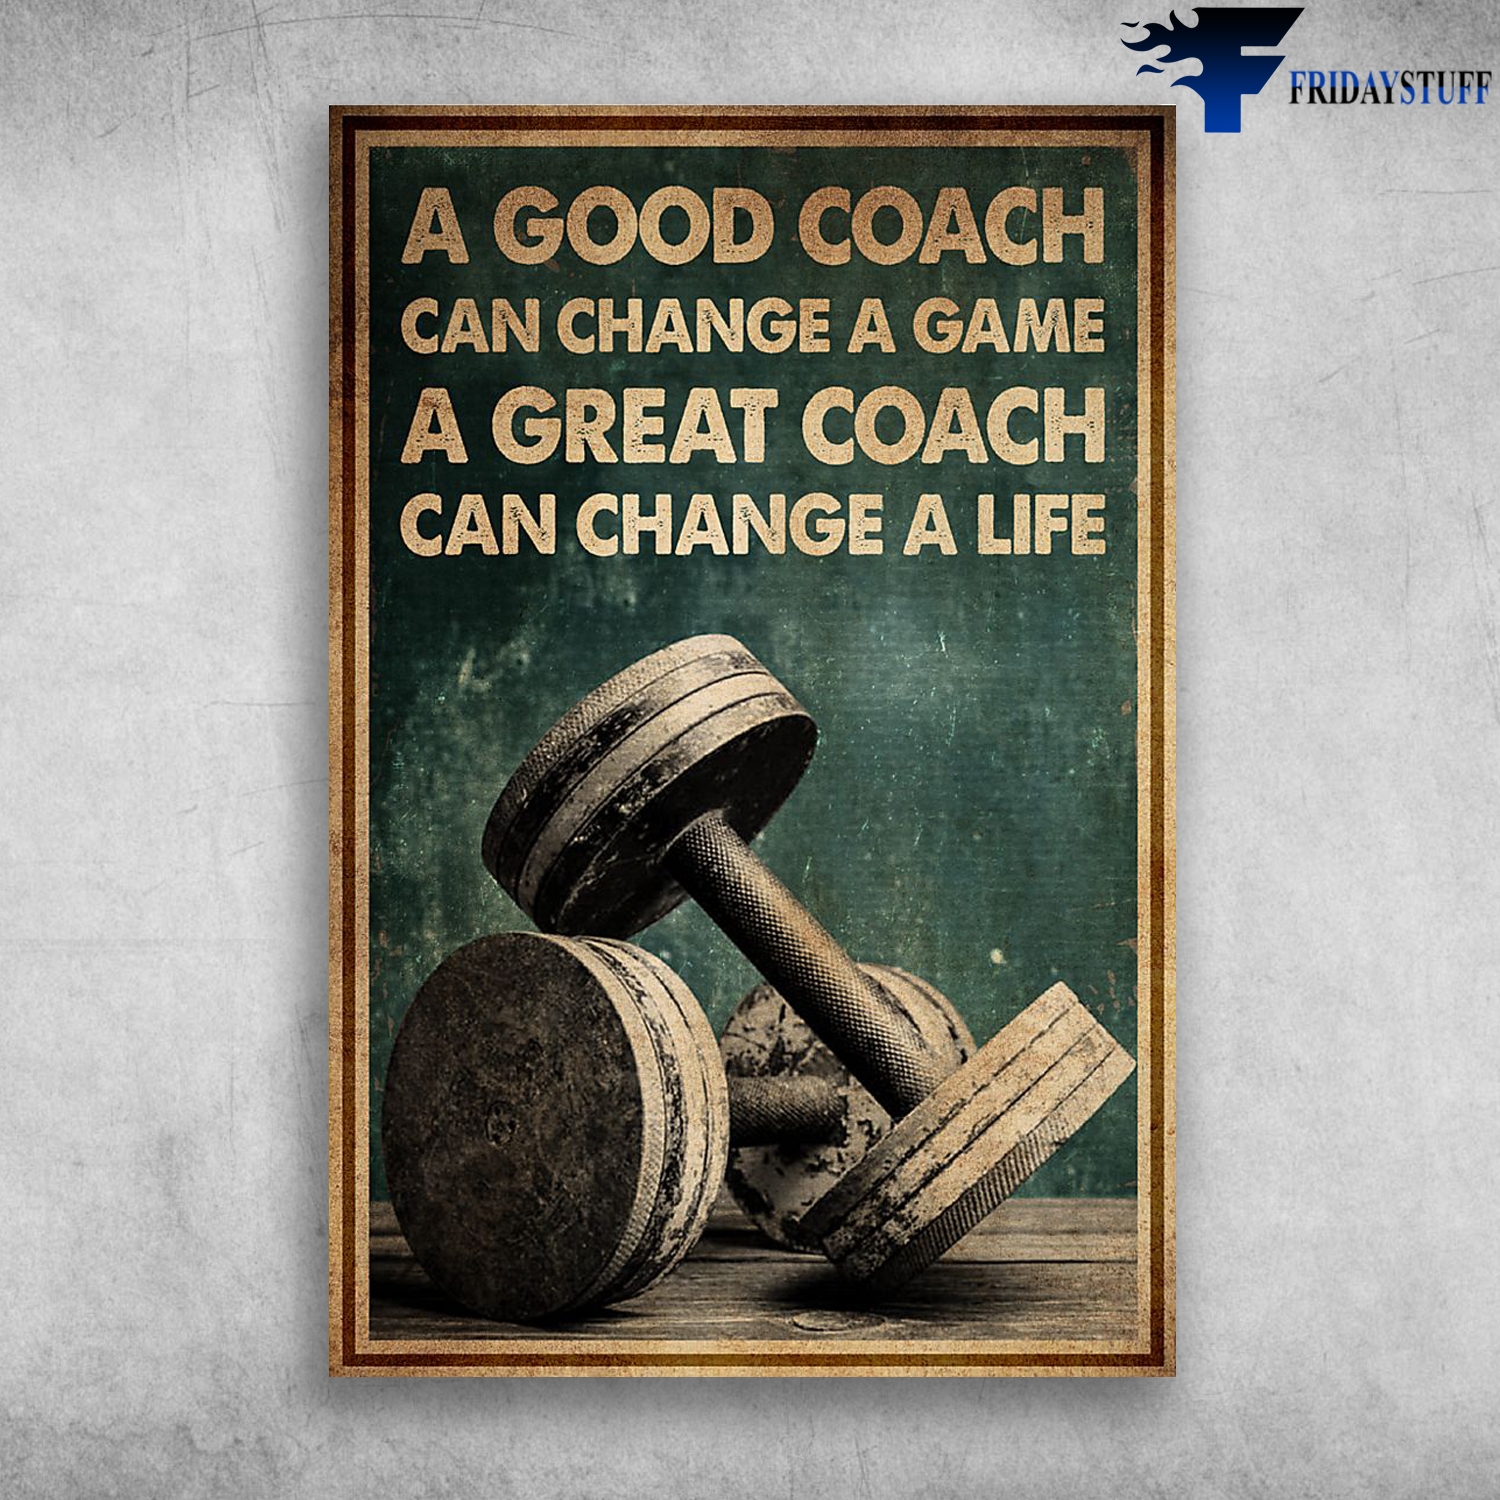 A Good Coach Can Change A Great Coach Can Change A Life